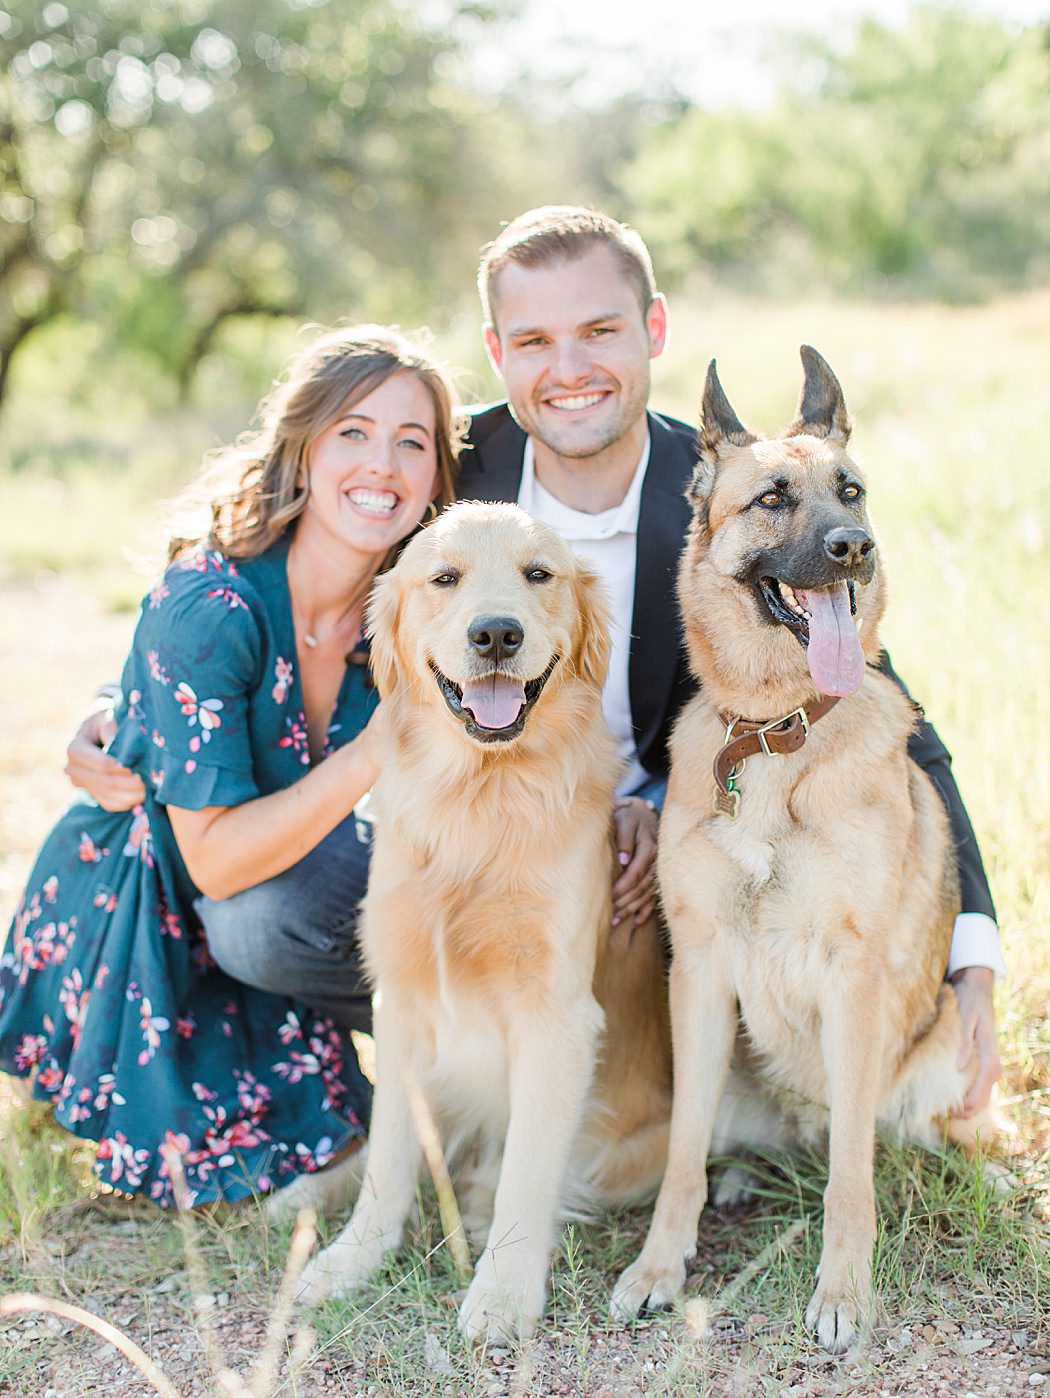 Contigo Ranch Engagement Session in Fredericksburg texas by Allison Jeffers Photography 0012